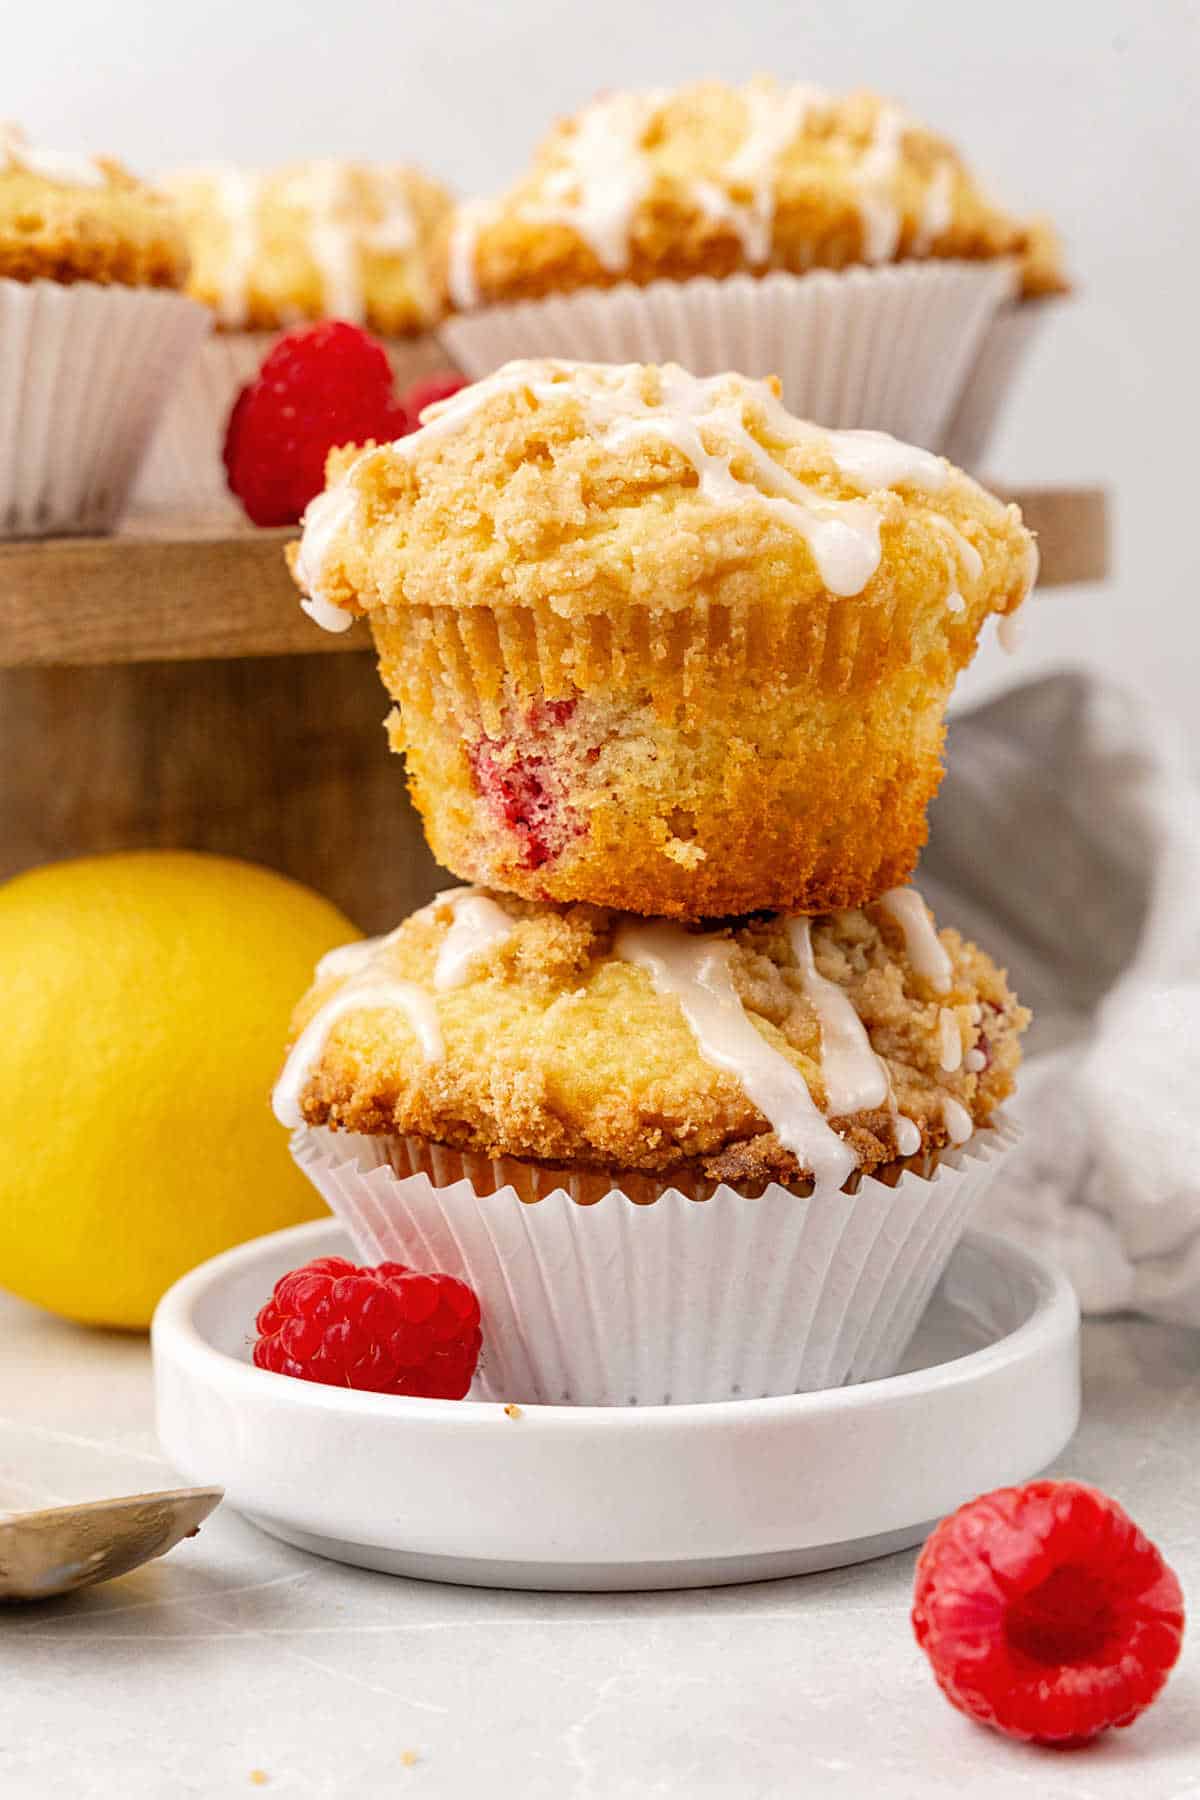 Two raspberry crumb muffins with glaze on a white plate. More muffins in background.